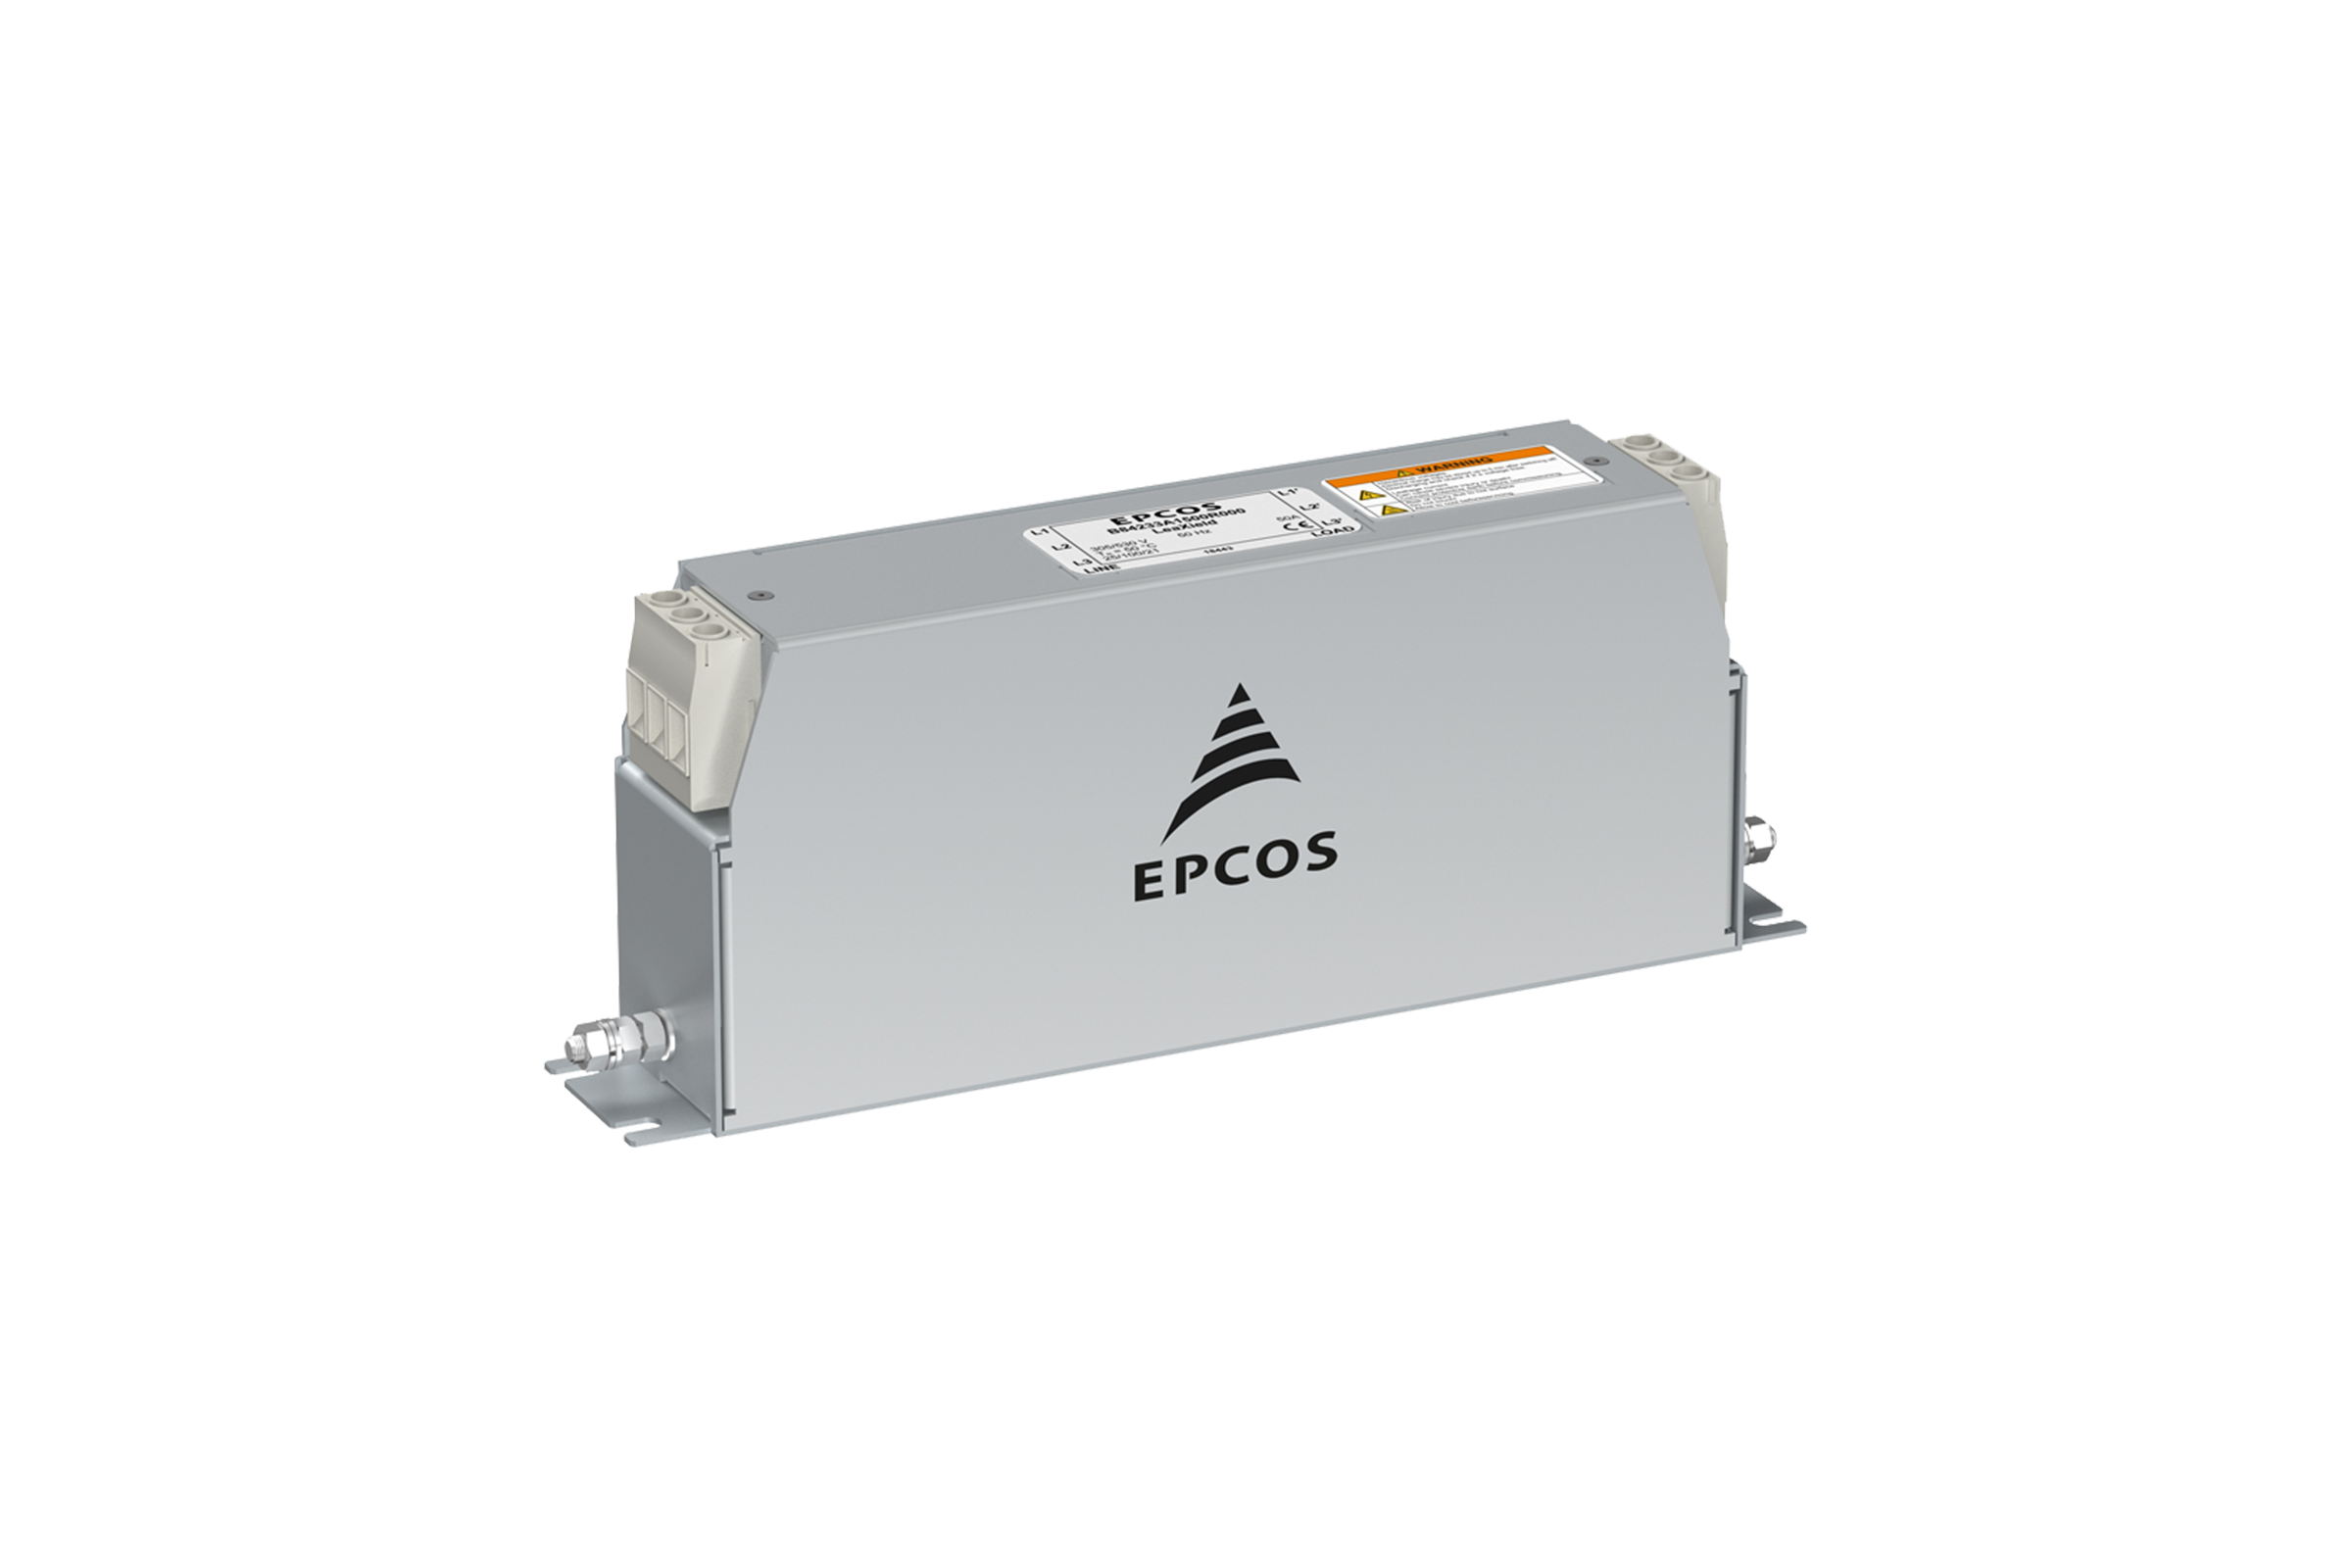 EMC Filters Minimize Earth Leakage Currents